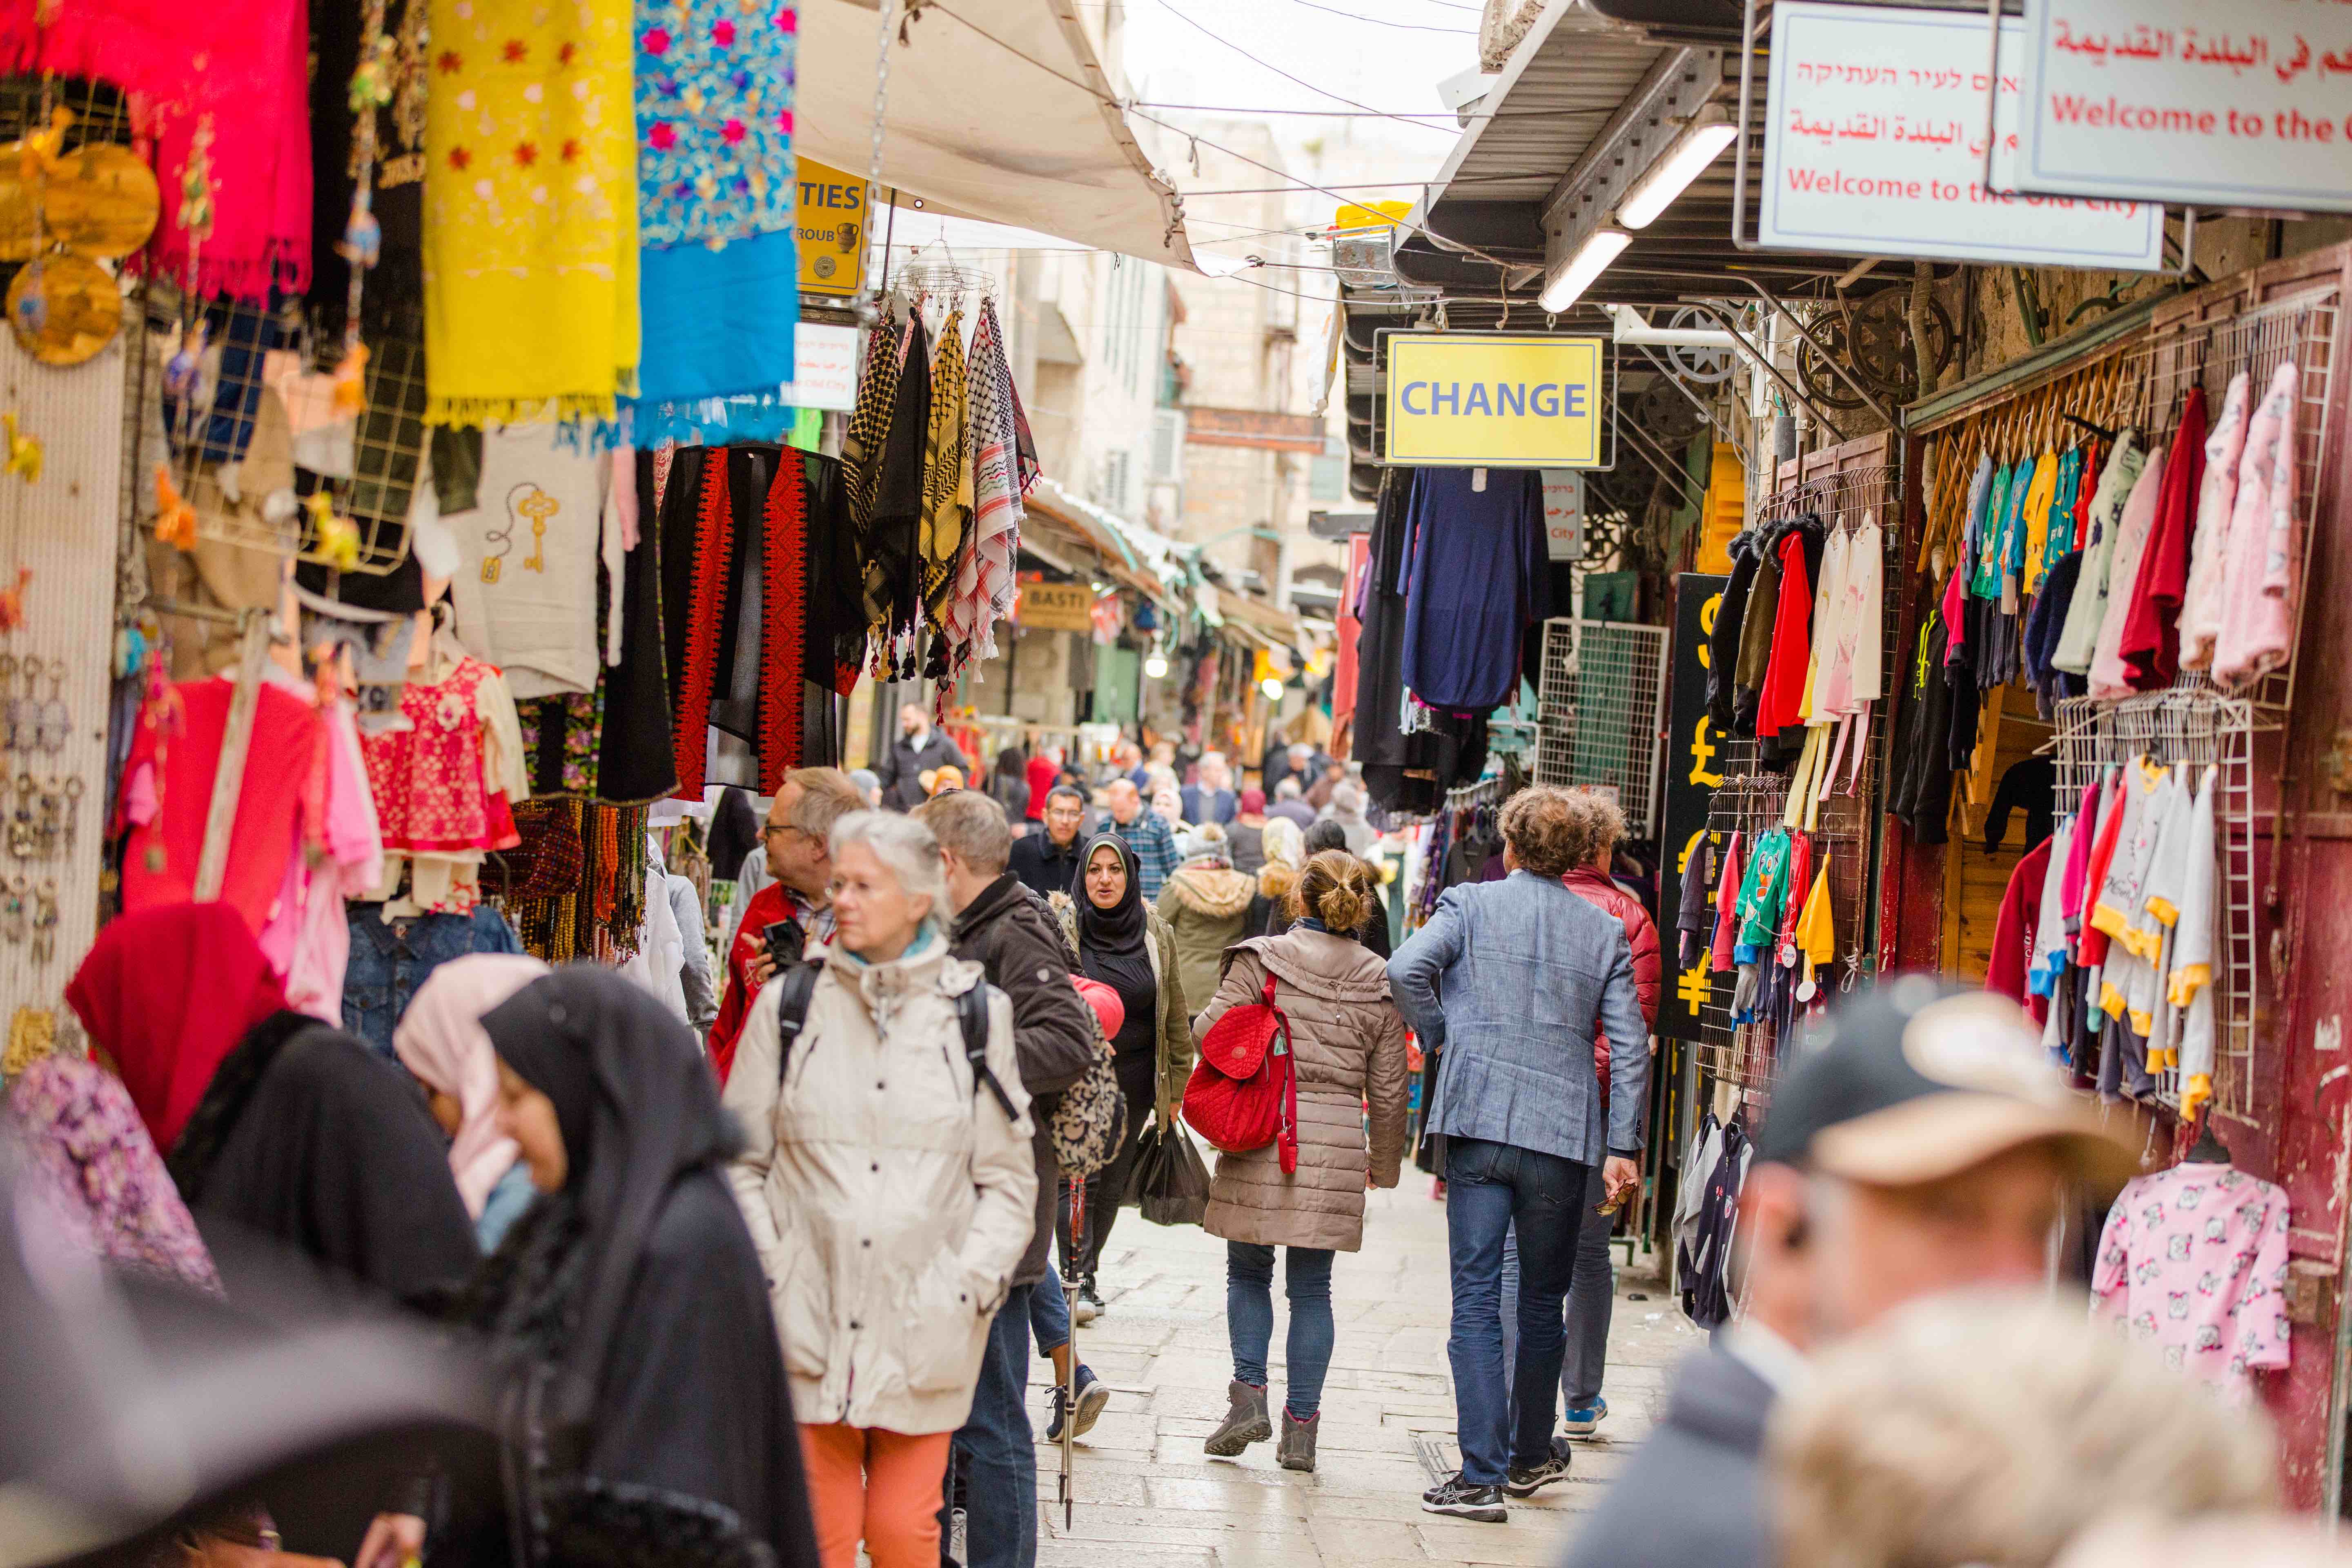 Shoppers of different ethnicities walking around the Arab Souk in Old City Jerusalem.